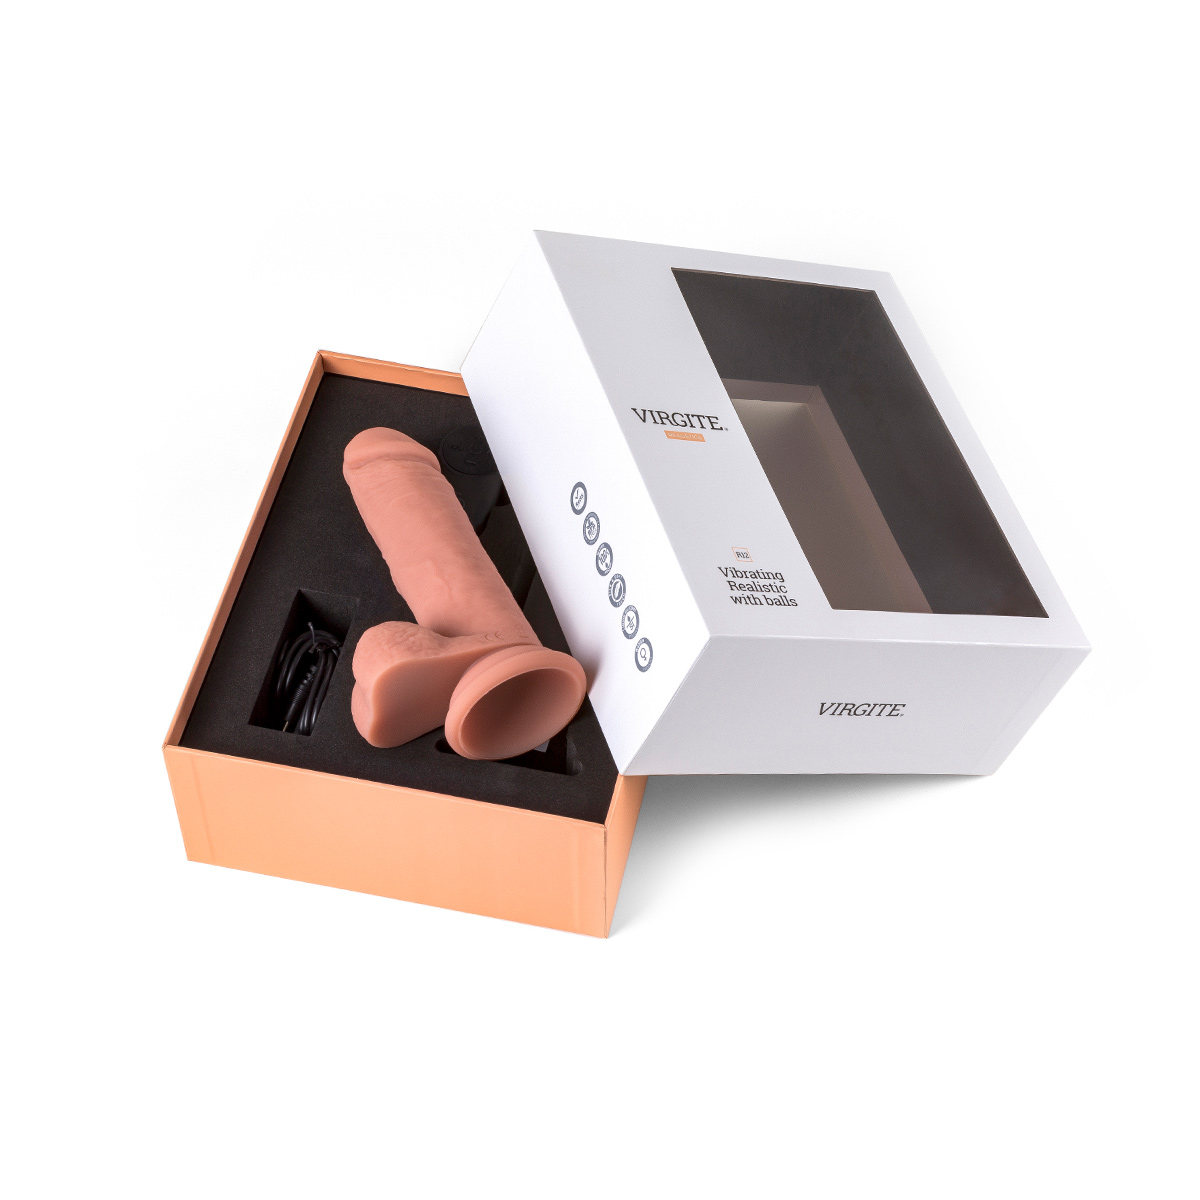 Vibrating-Realistic-with-Remote-R12-Flesh-OPR-3090095-4